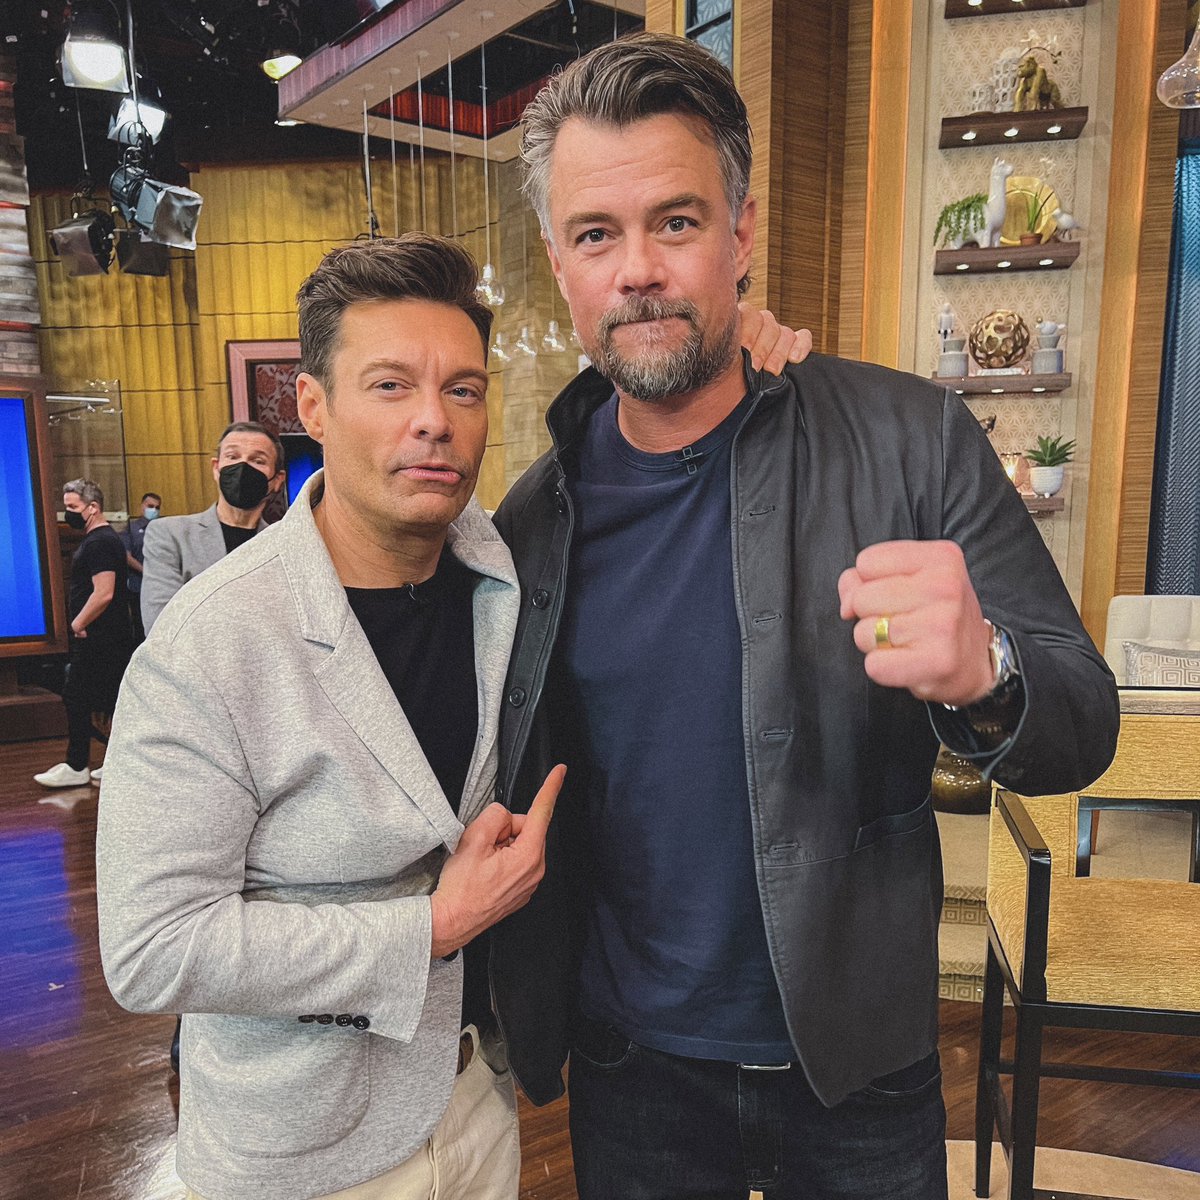 Ty @joshduhamel for dropping by and ty @GELMANLIVE for photobombing